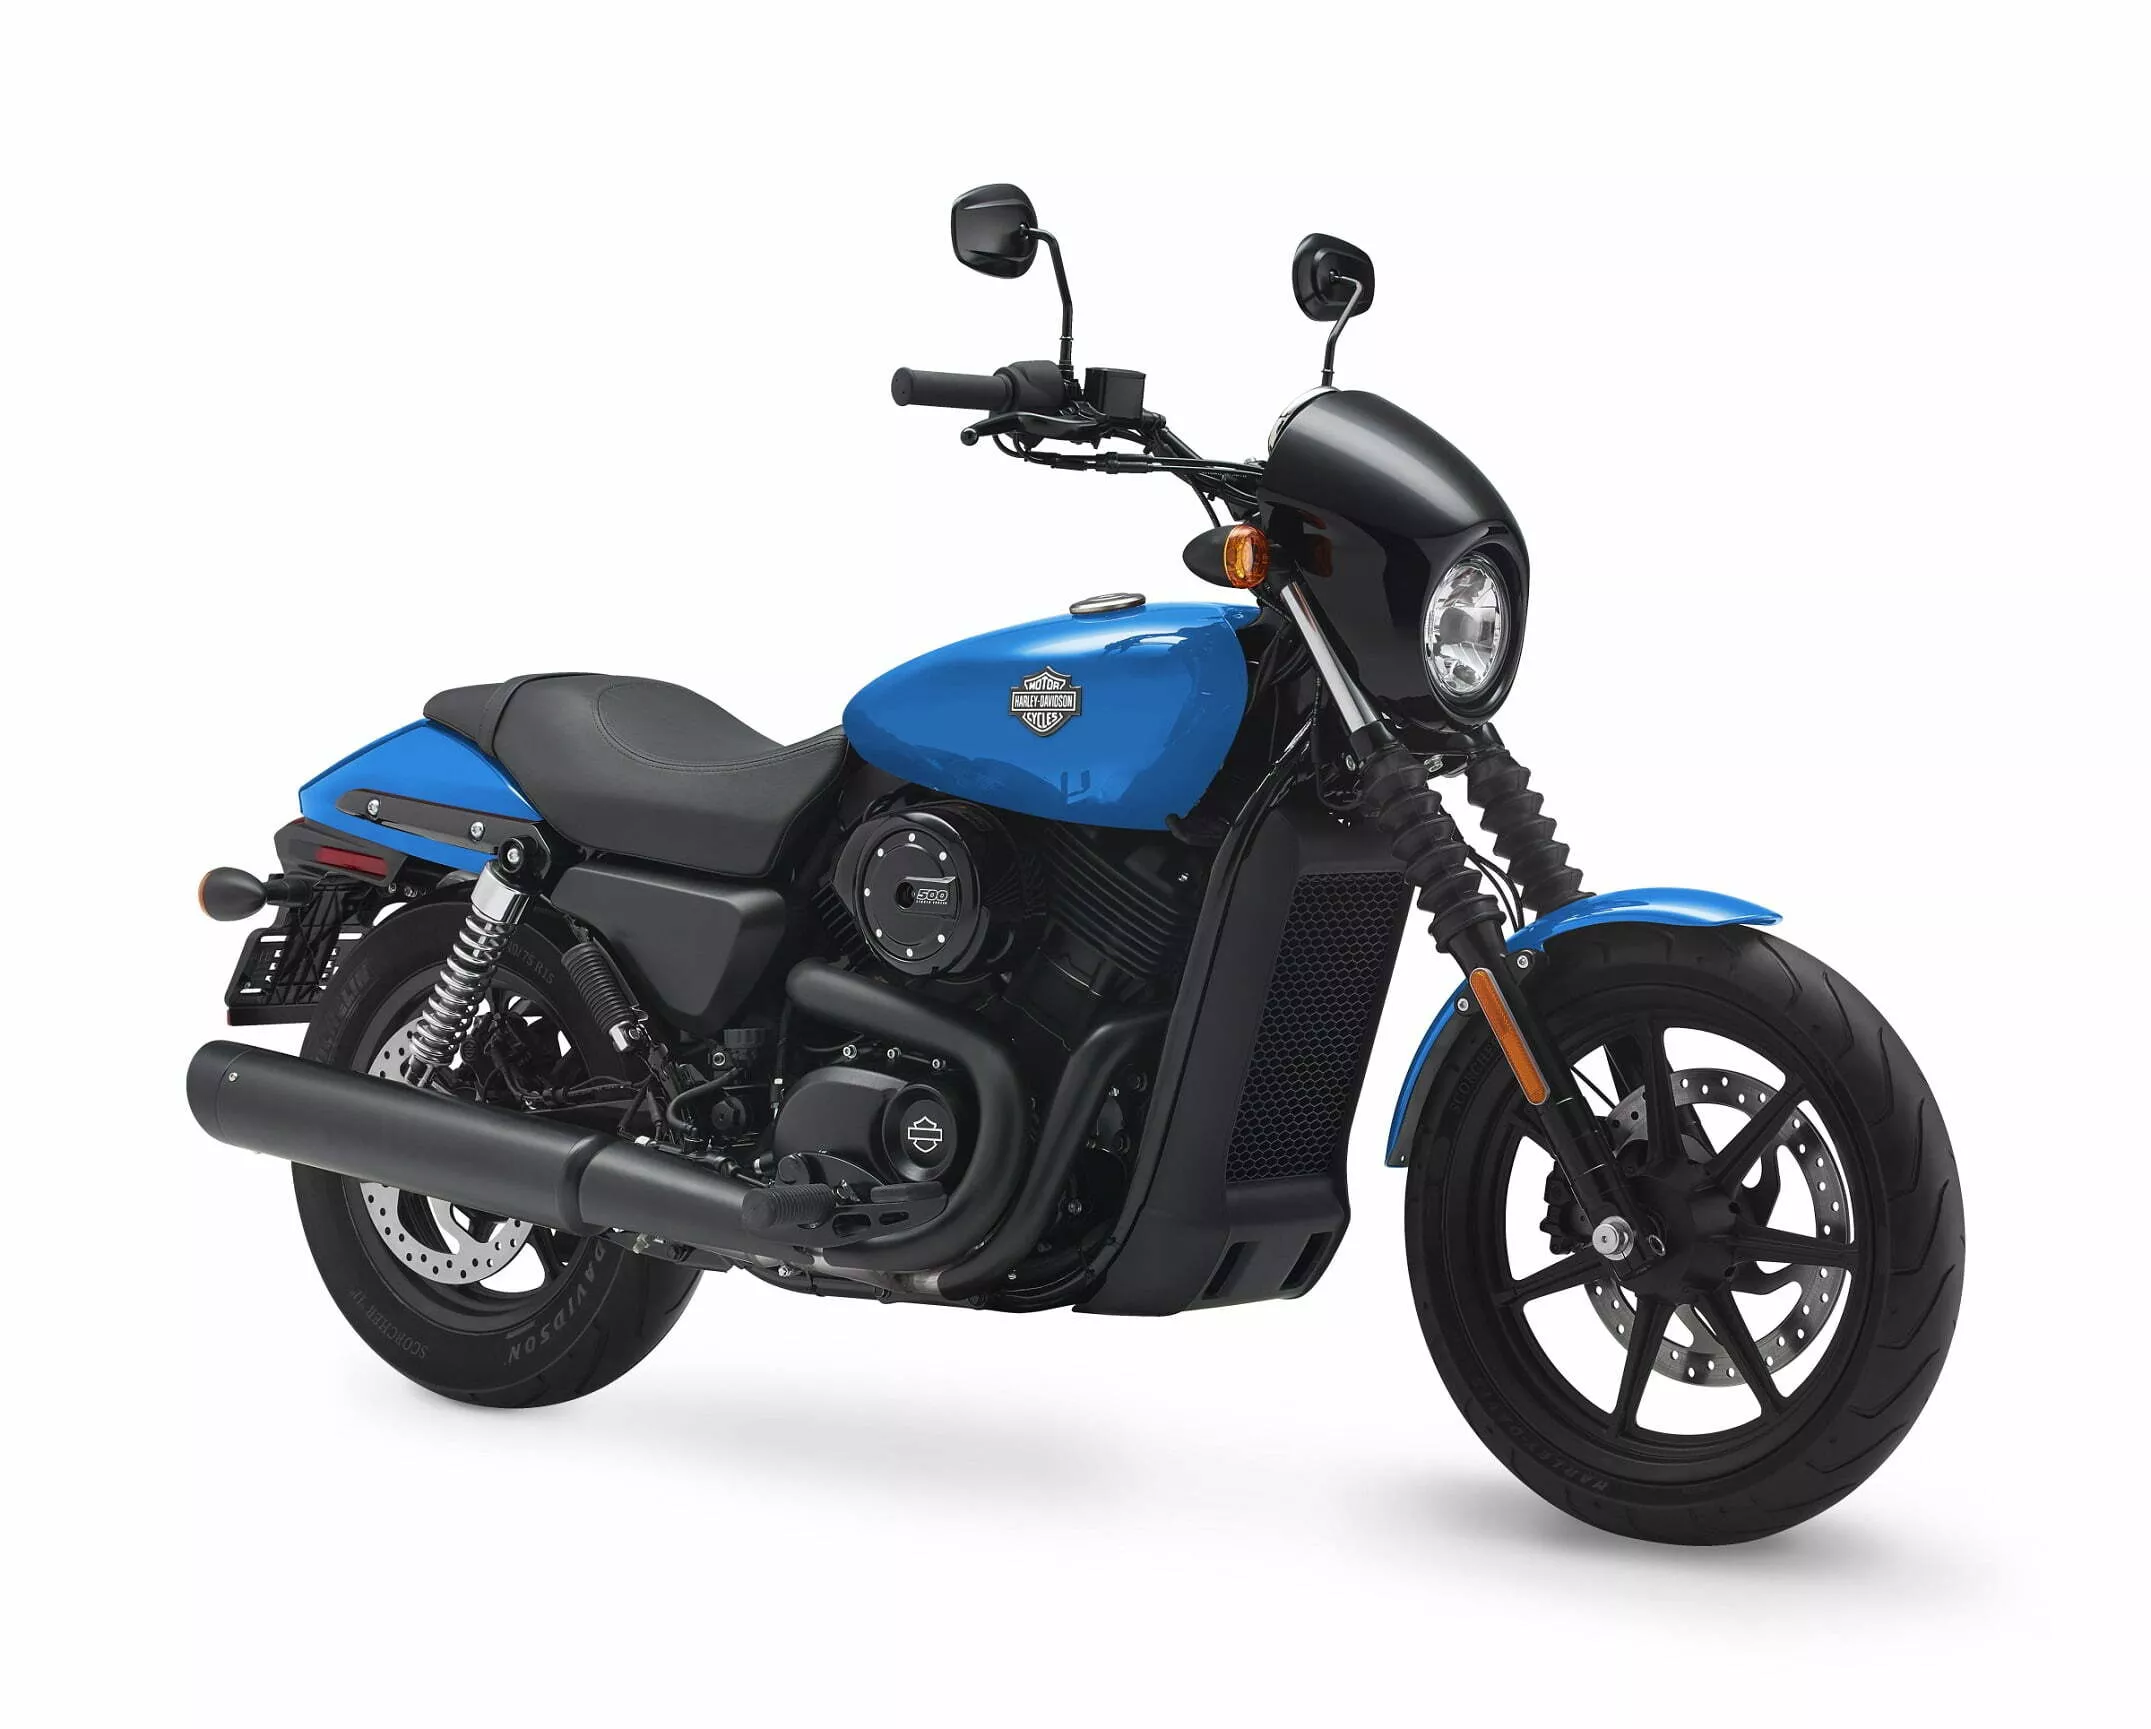 Harley’s entry-level Street model is designed for the global market, with a light weight easy maneuverability and an easy buy-in.